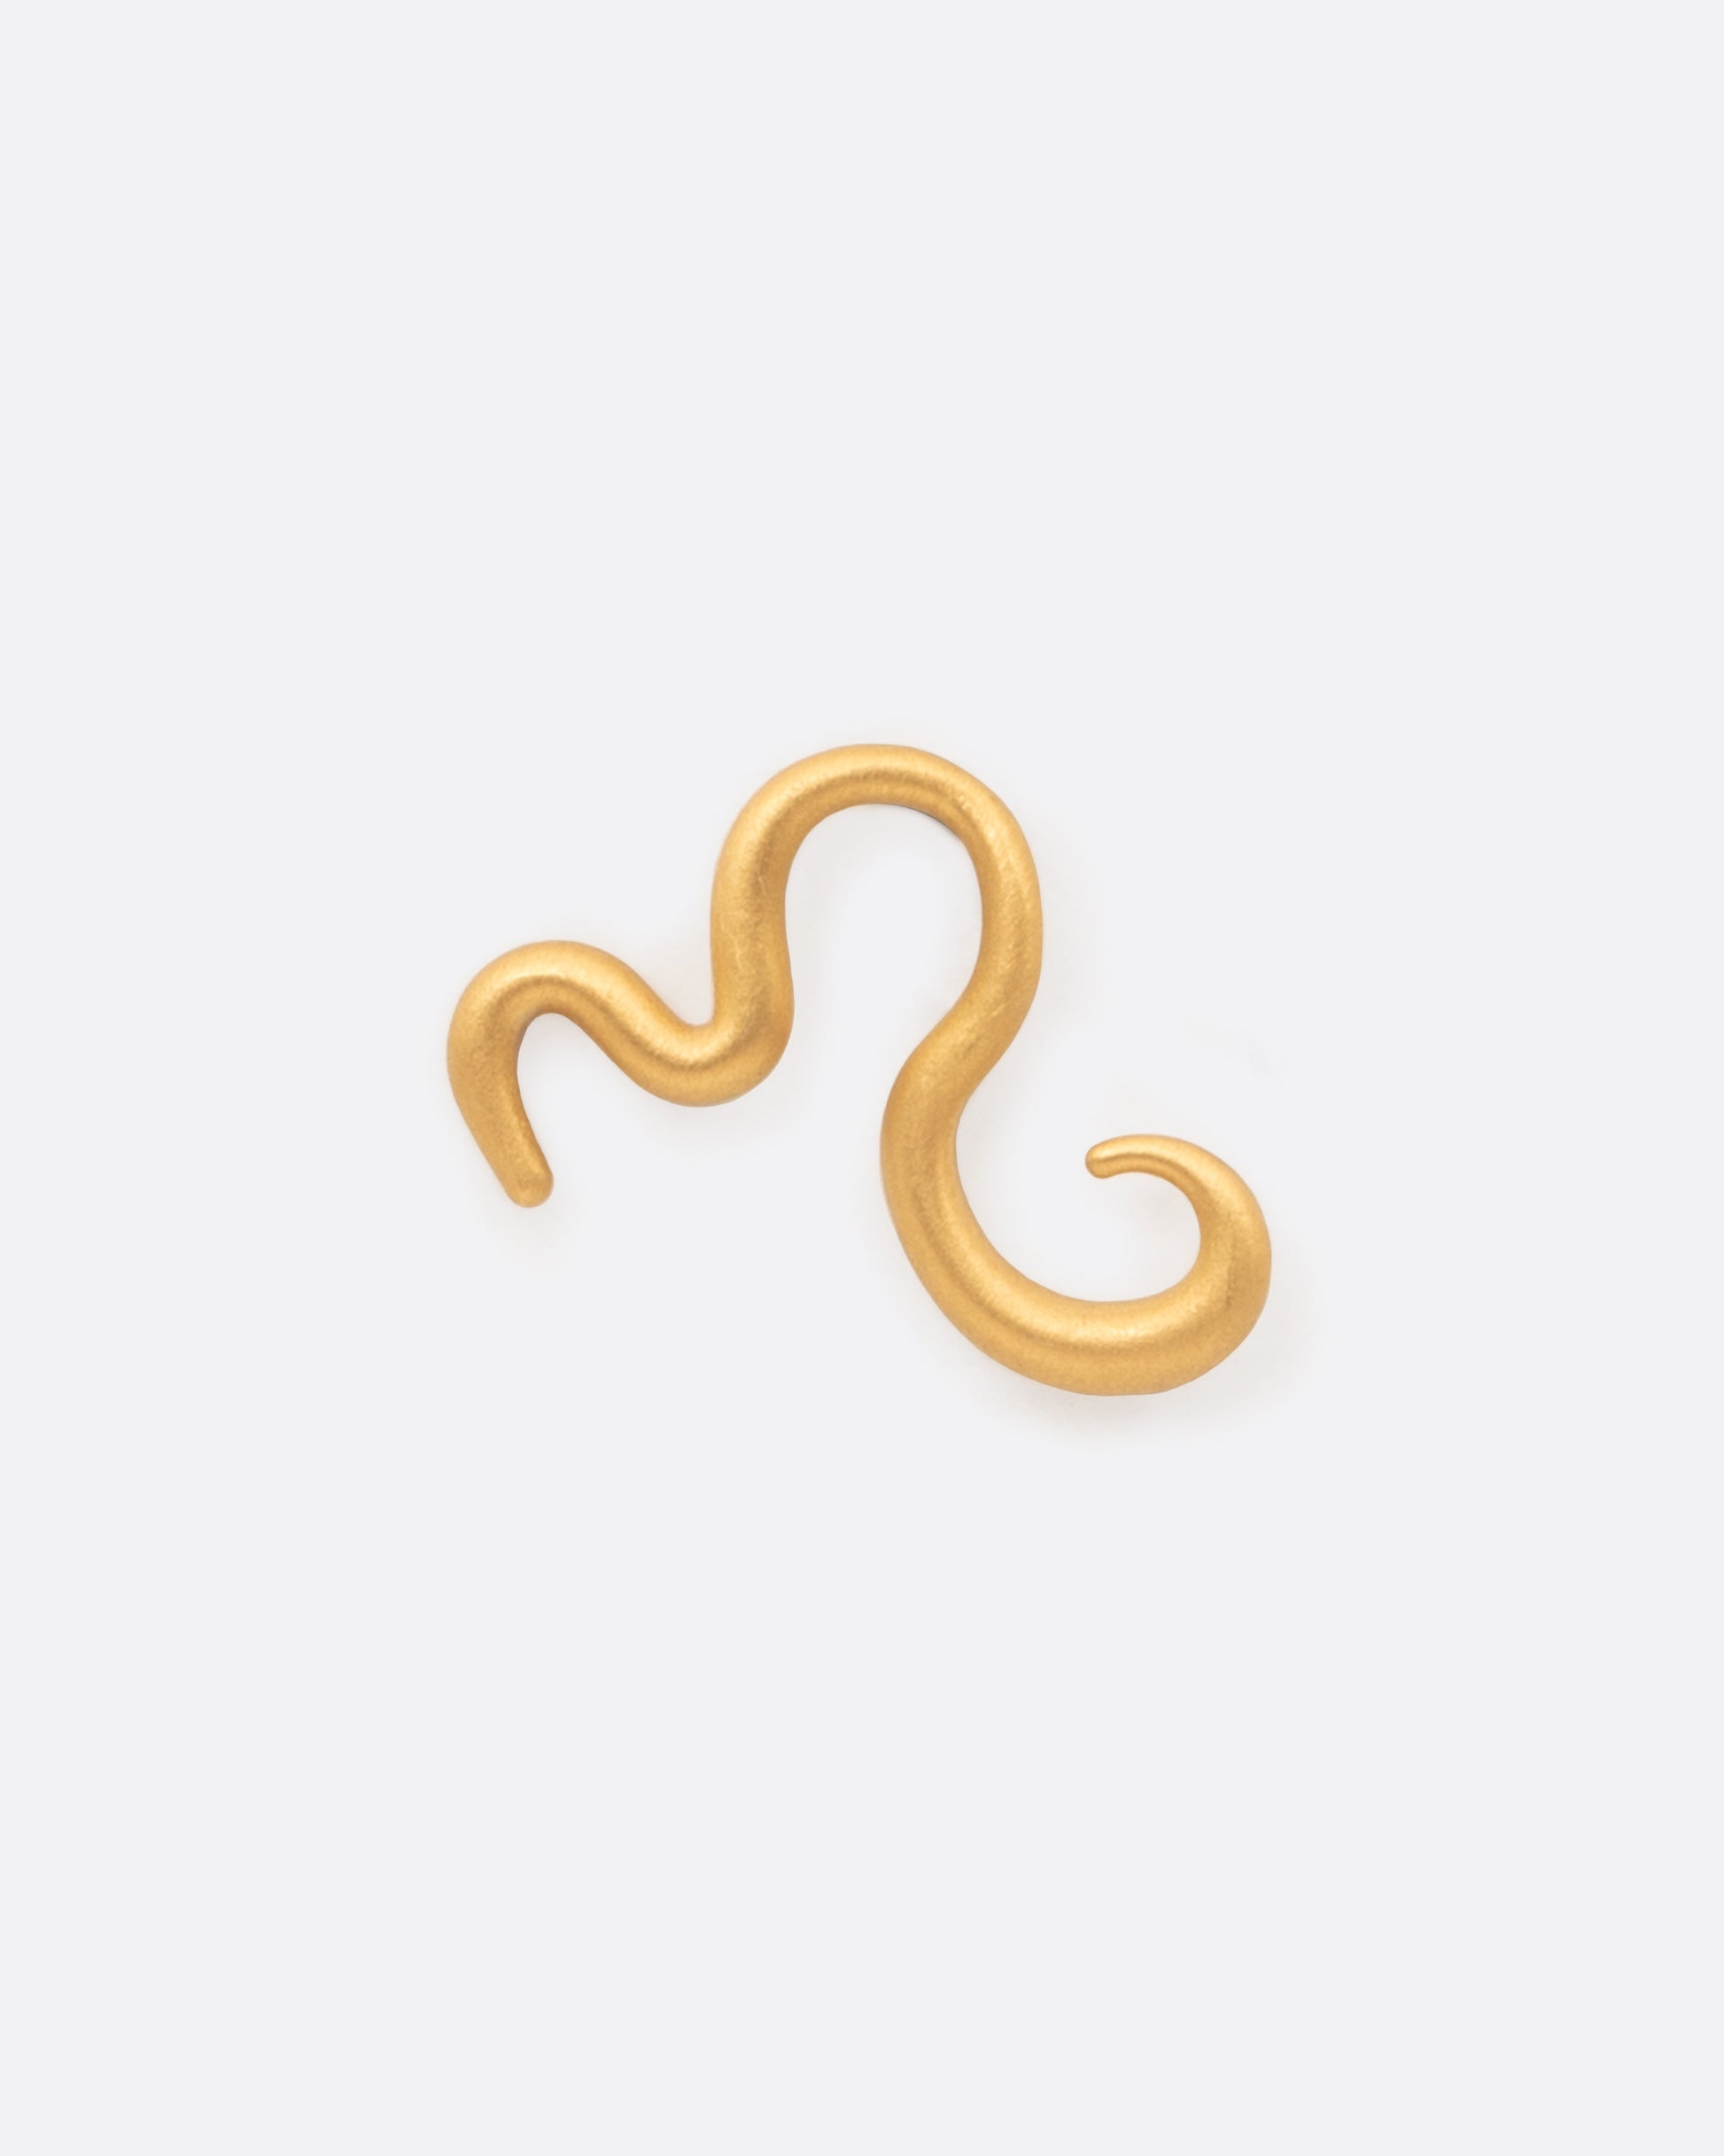 A curved 22k yellow gold snake stud earring, meant for the left ear.